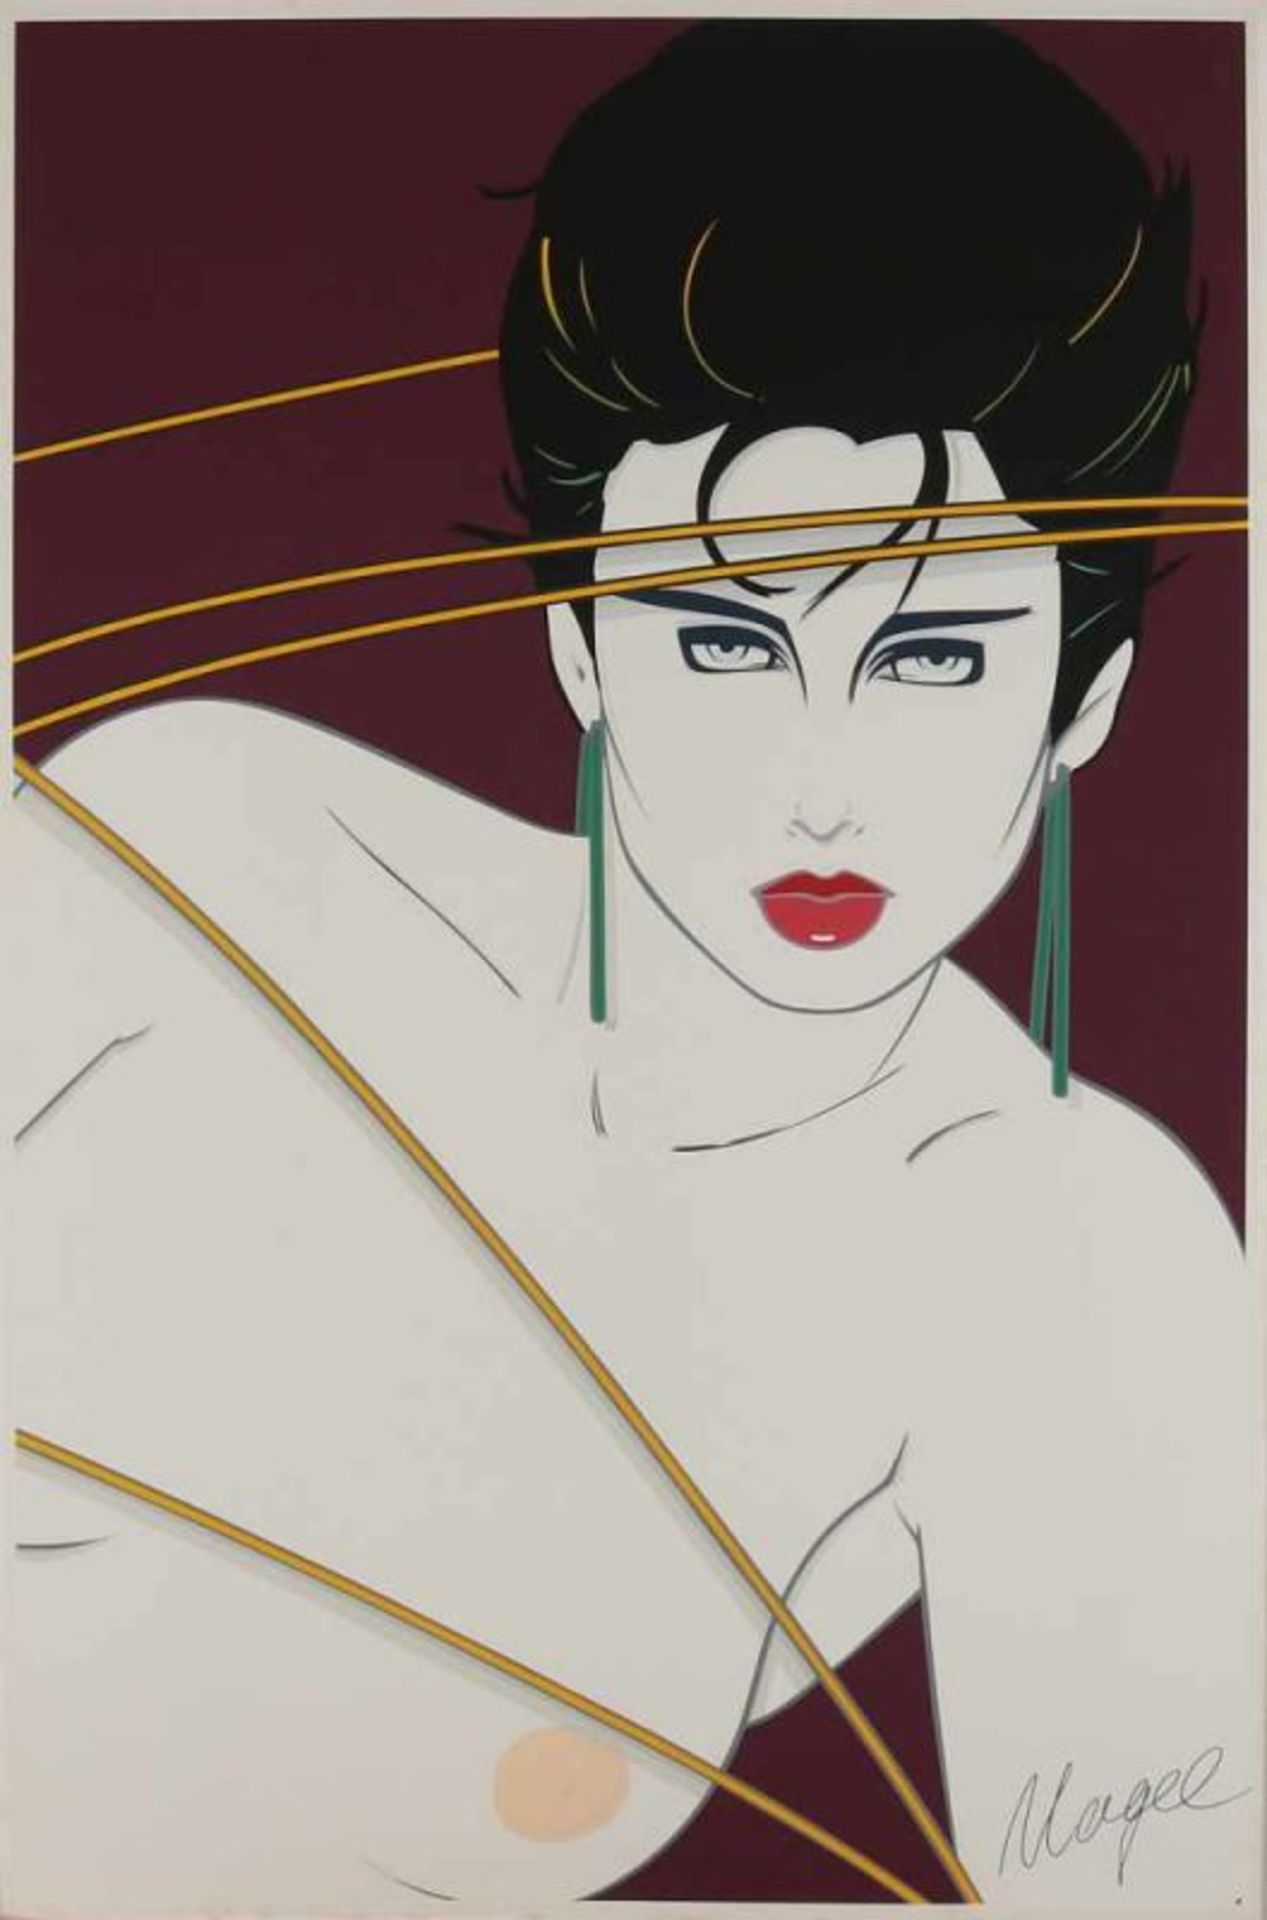 Patrick Nagel. 1945 - 1984 U.S.A. Ladies bust. Lithograph on paper. Dimensions: H 88 x W 58 cm. In